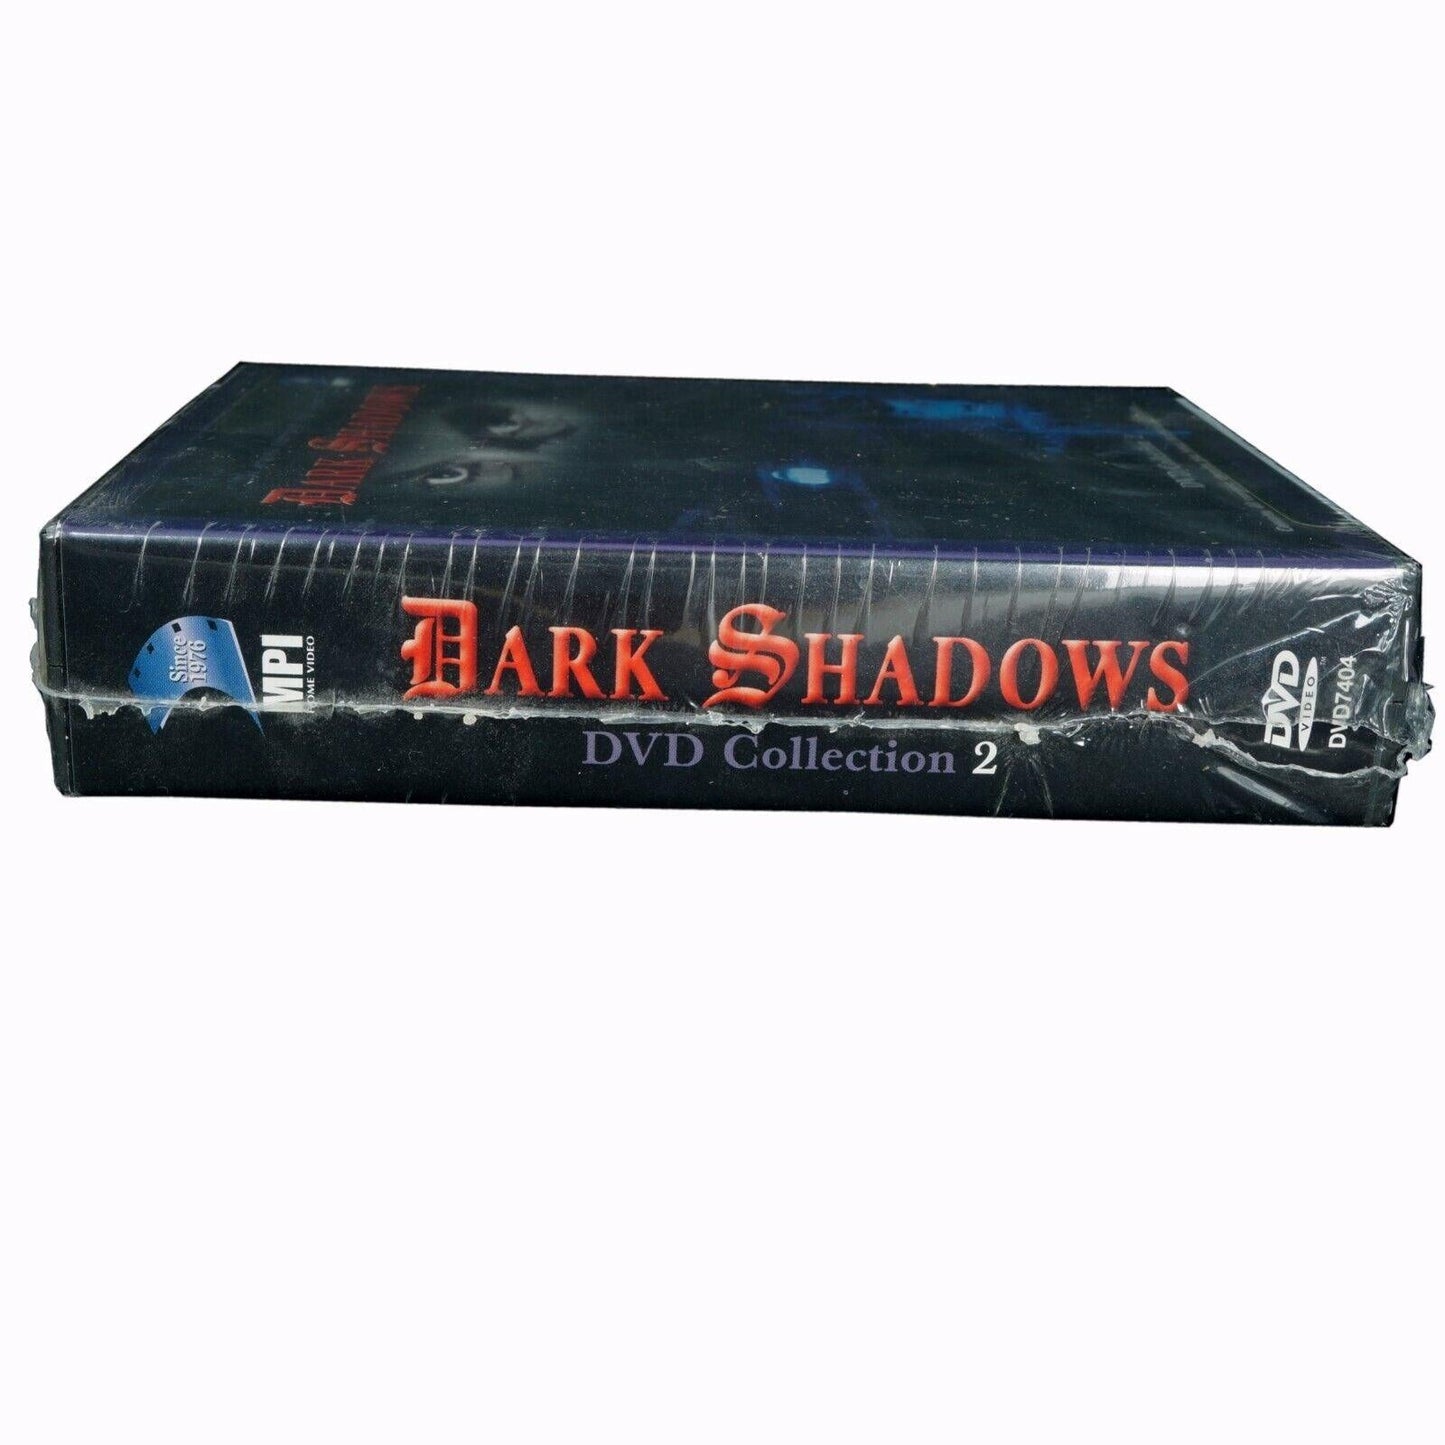 Dark Shadows: DVD Collection 2, 1966-71 (DVD-2002) Horror/Soap Opera. - Bear and Raven Antiques